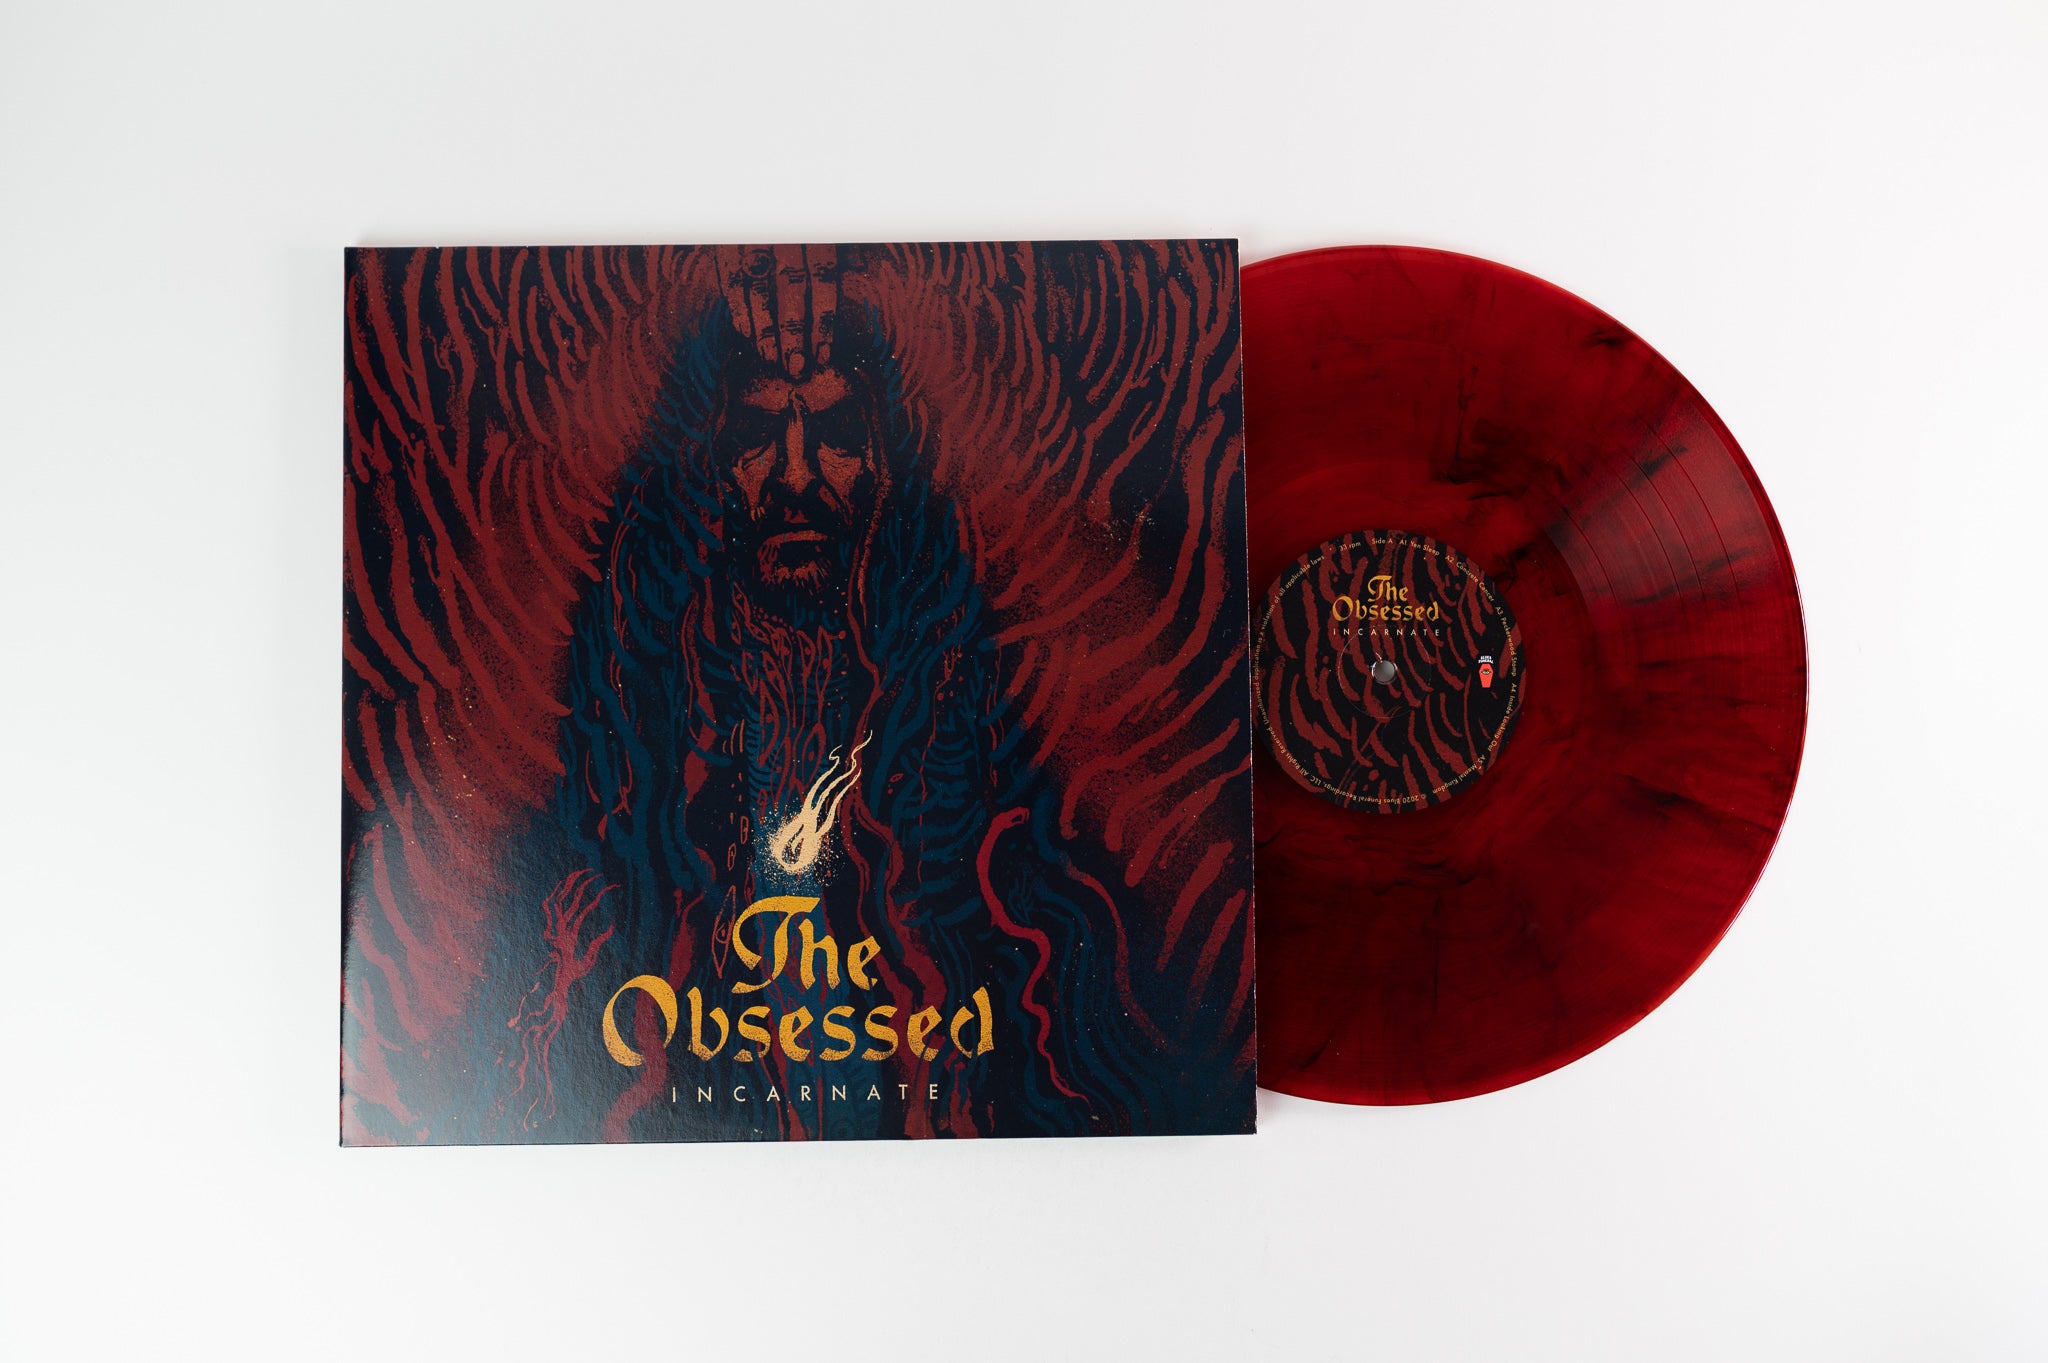 The Obsessed - Incarnate on Blues Funeral Recordings - Red & Black Marbled Vinyl